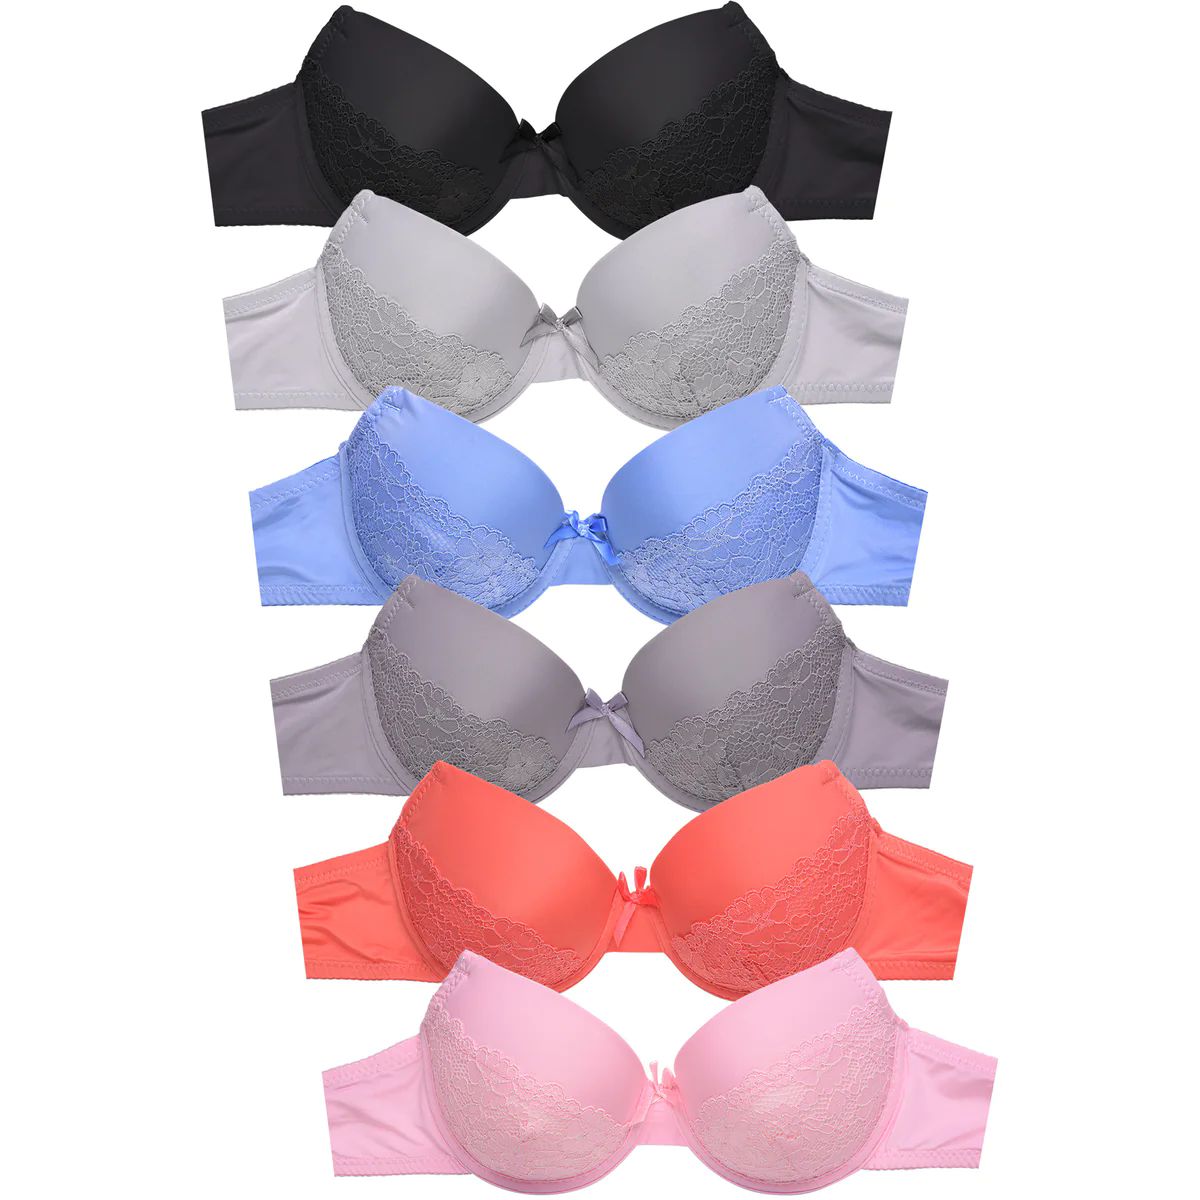 288 Pieces of Mamia Ladies Plain/lace Bra, Strapless, Assorted Sizes C Cup